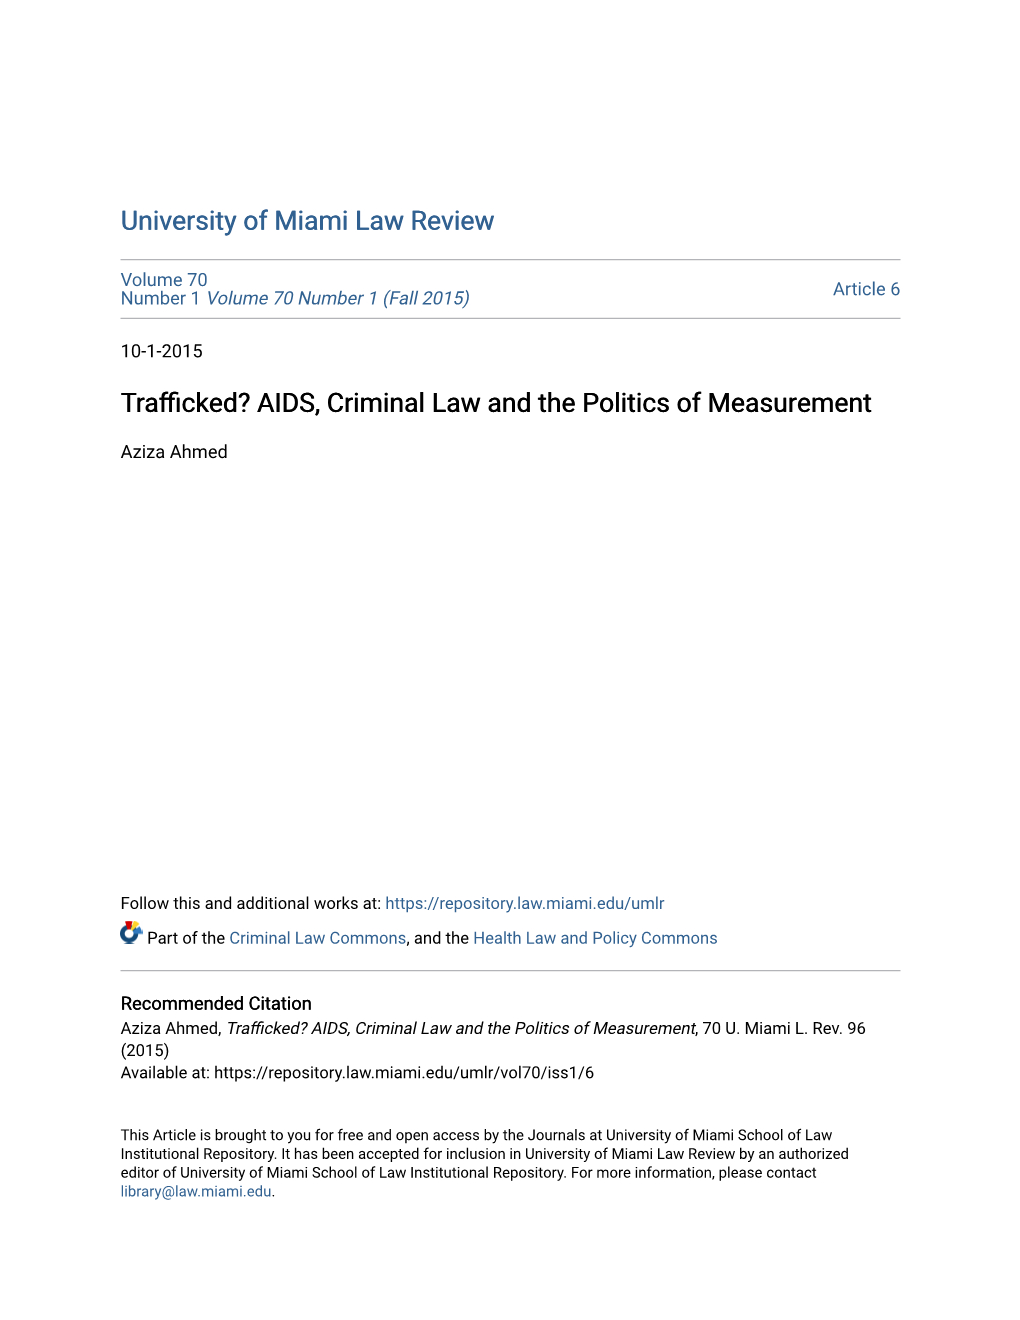 Trafficked? AIDS, Criminal Law and the Politics of Measurement